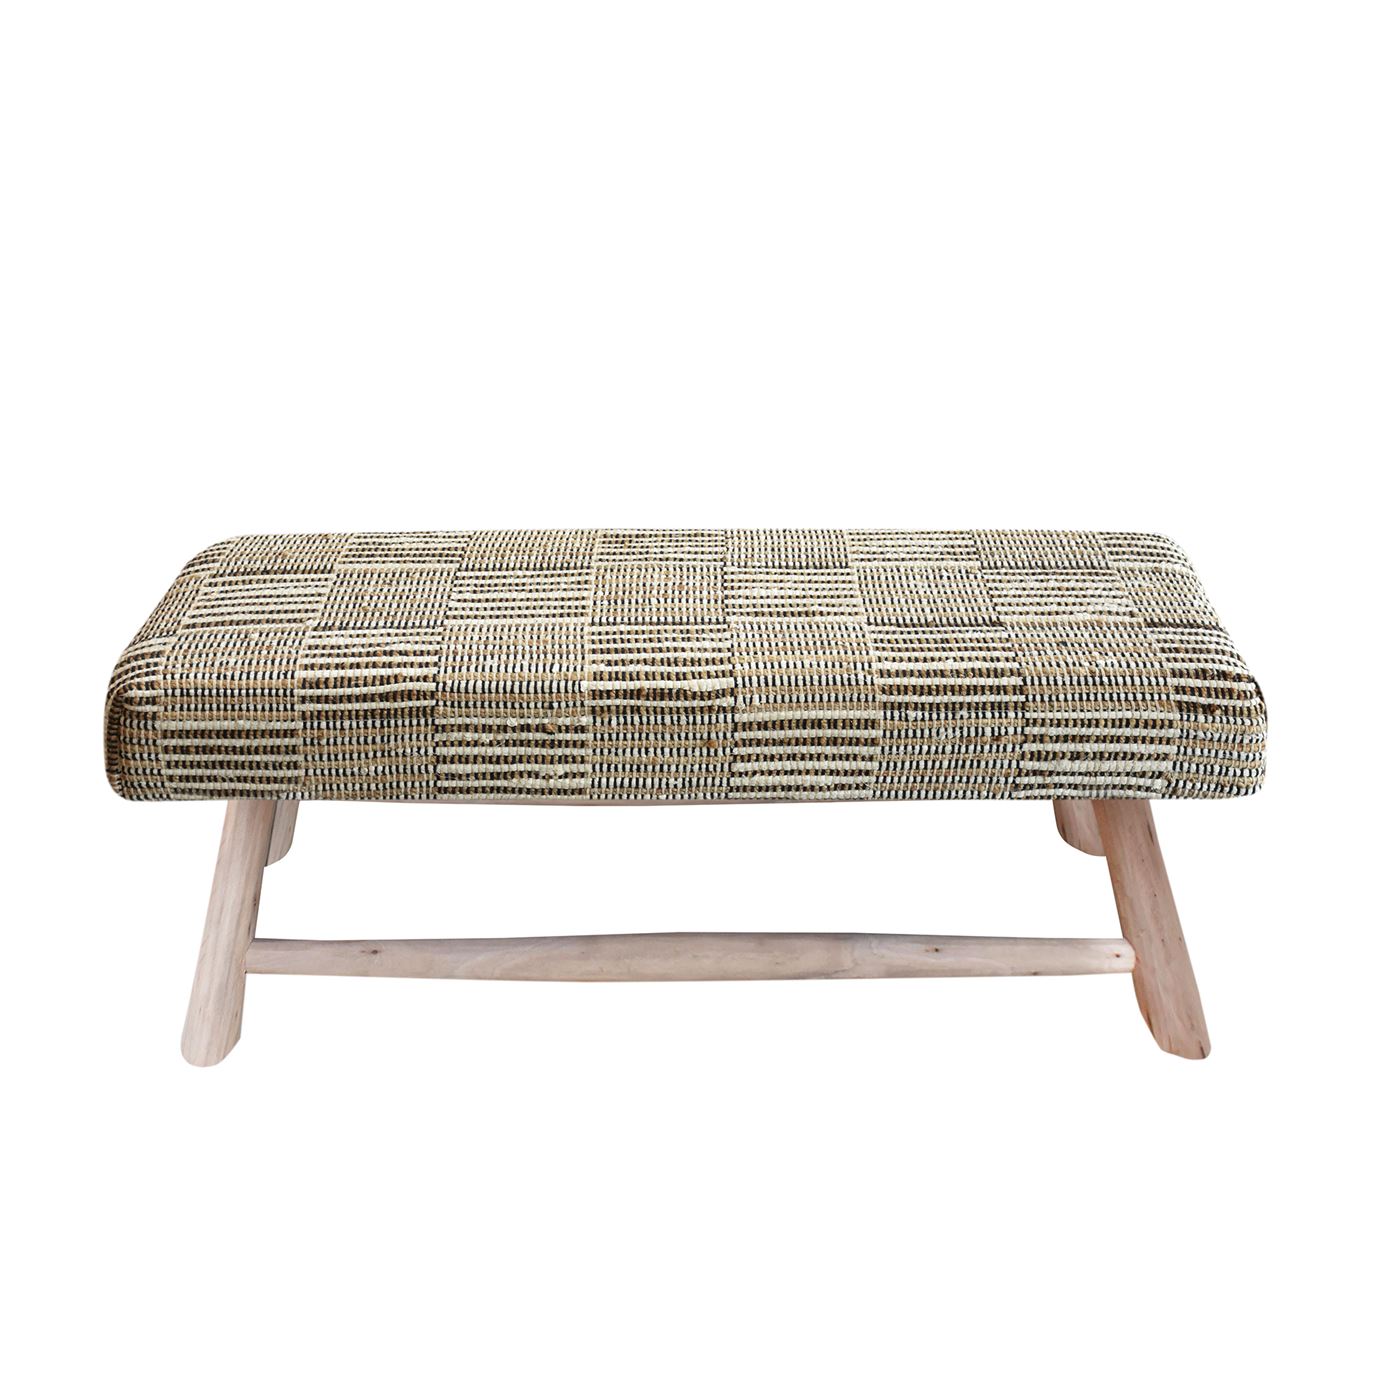 Rodeo Bench, Hemp, Recycled Cotton, Natural White, Natural, Pitloom, Flat Weave